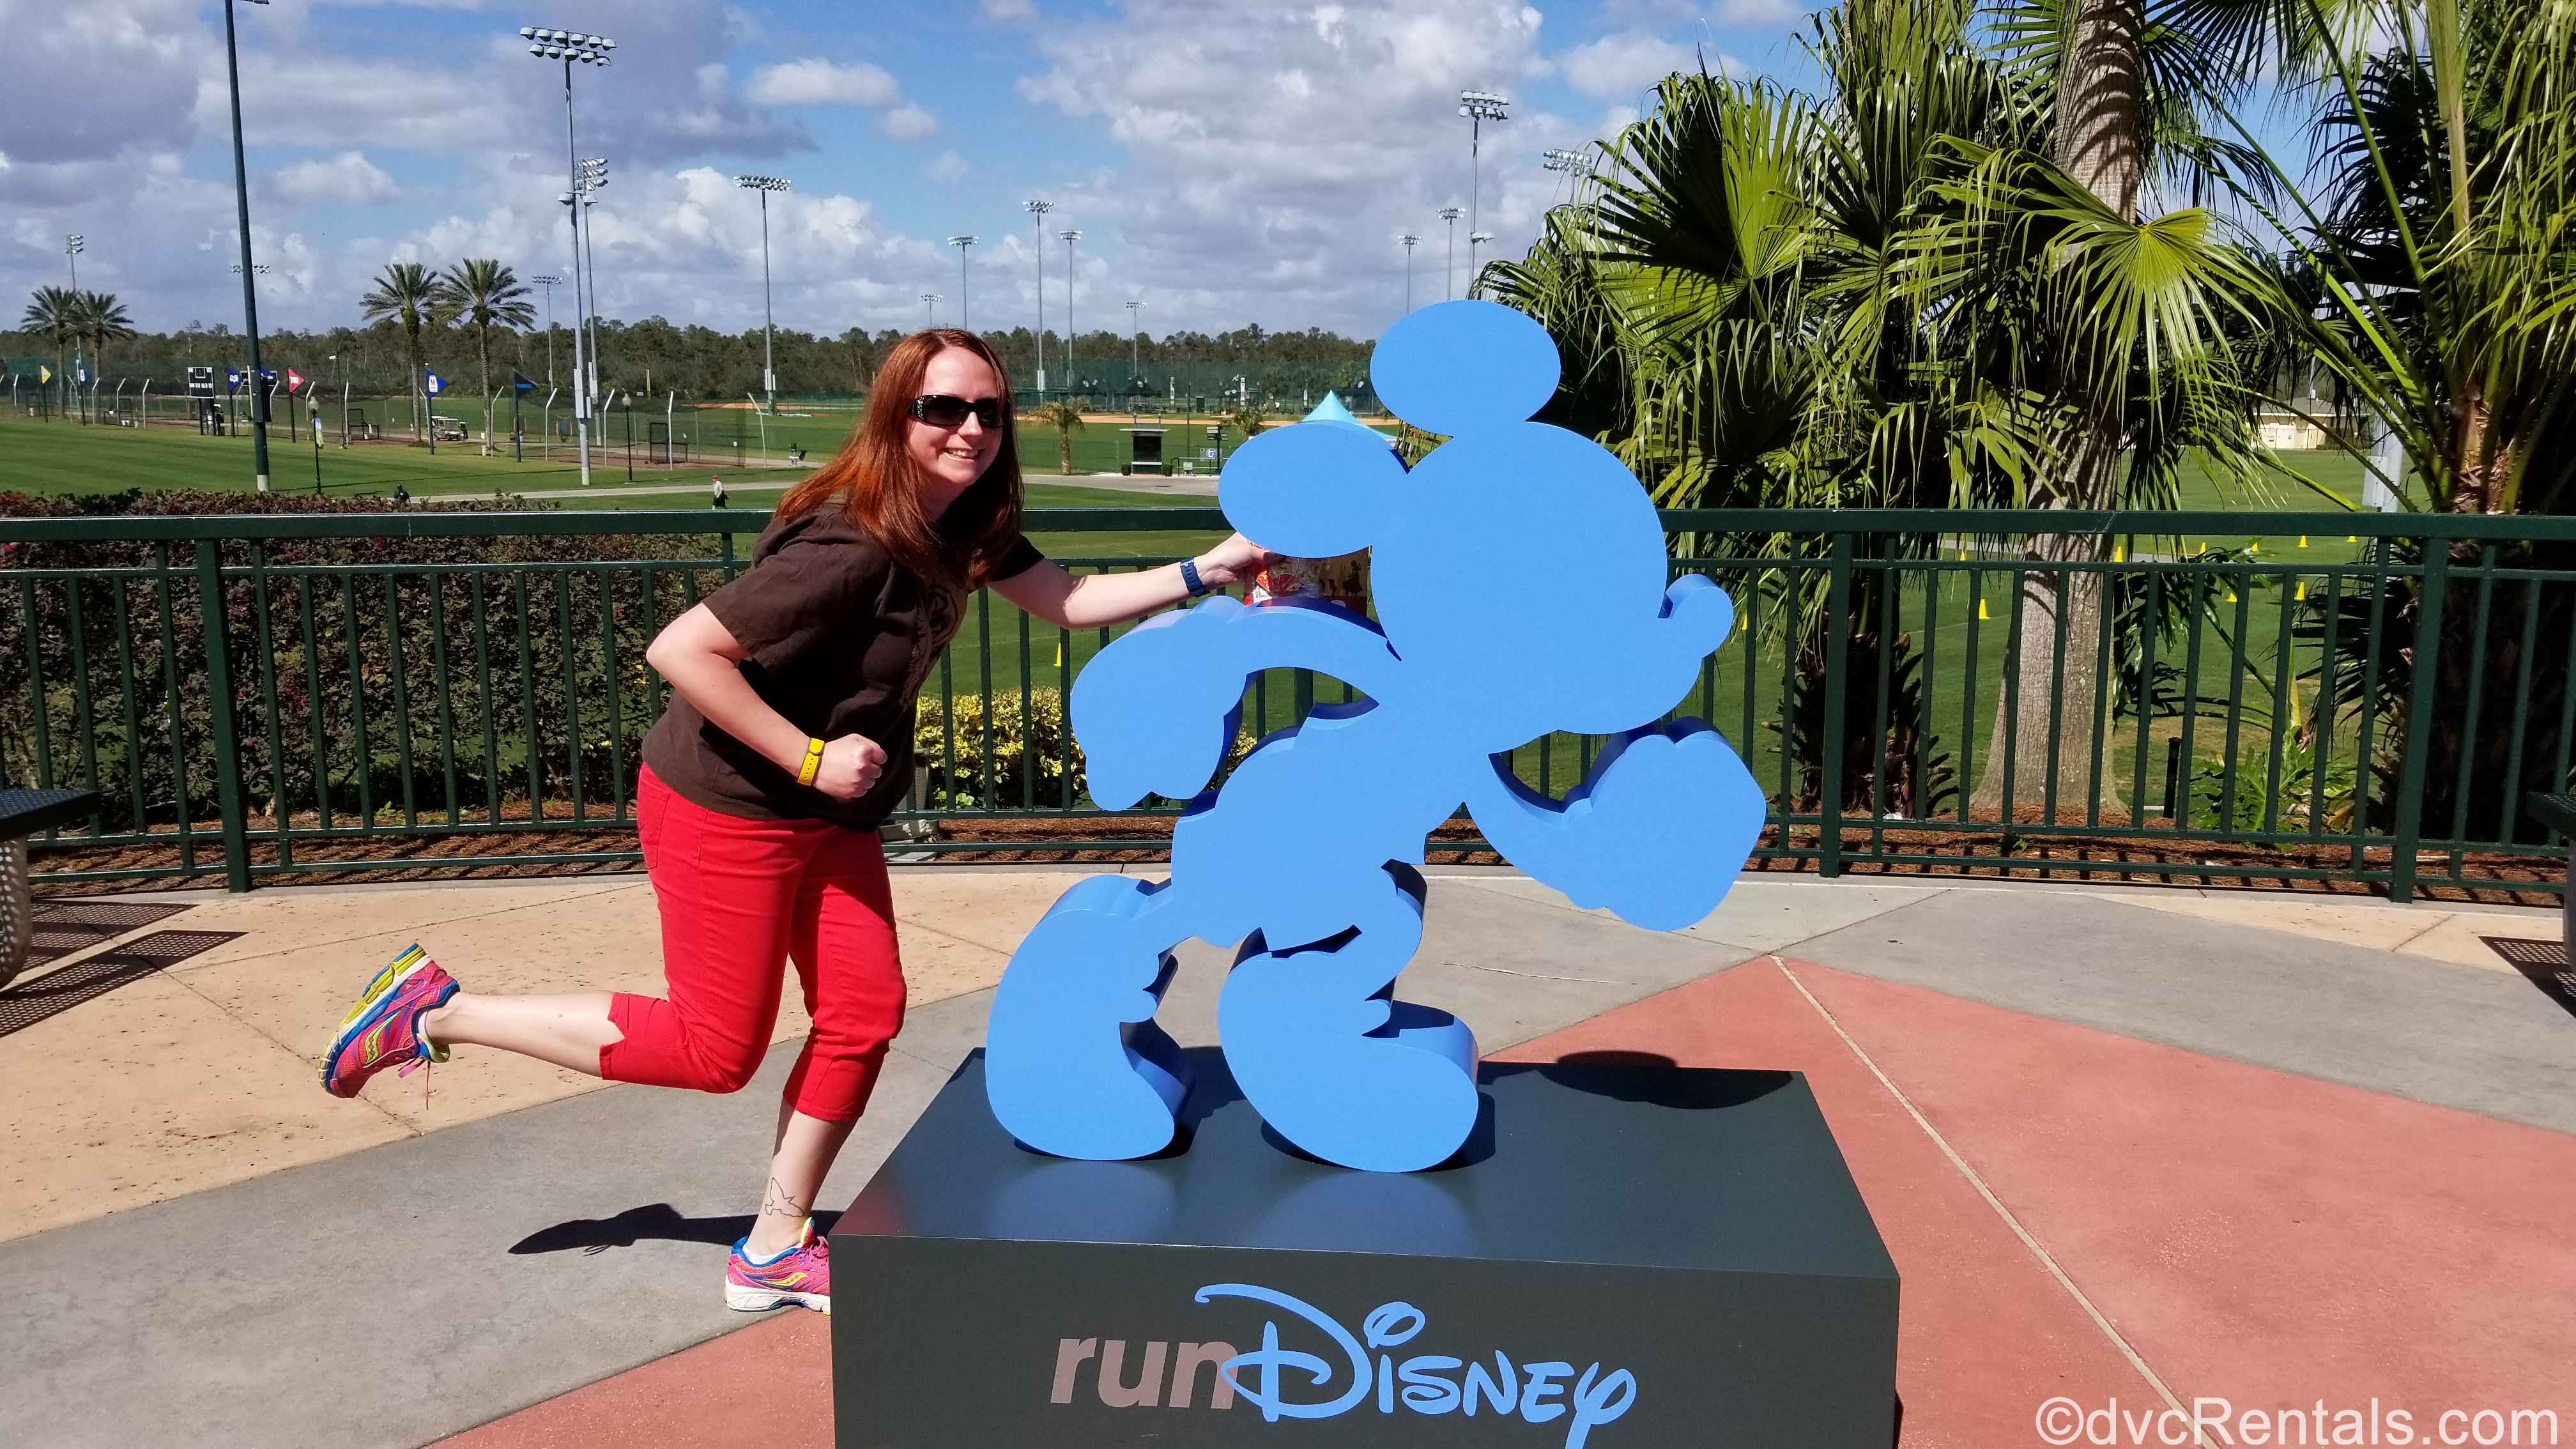 Team Member Kelly with the Run Disney Sign